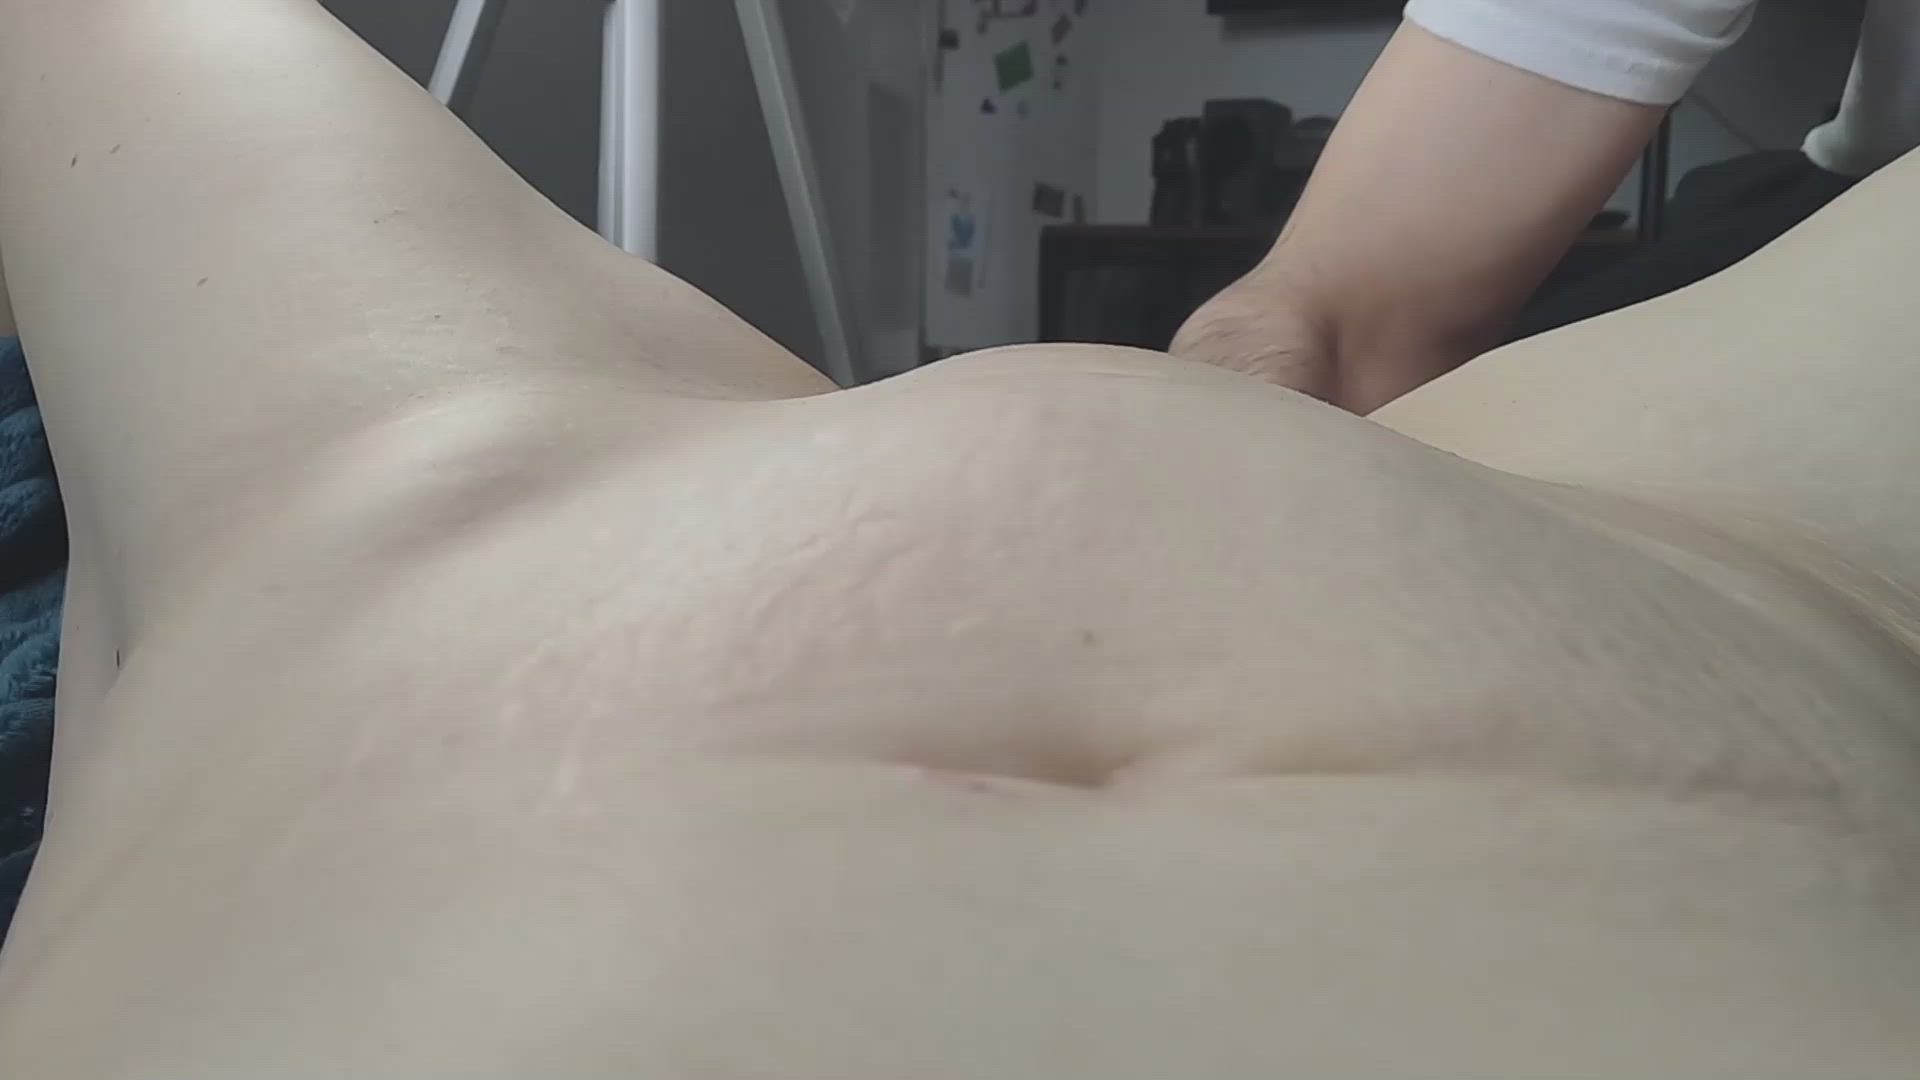 A Different View During Fisting With A Bit Of A Belly Bulge